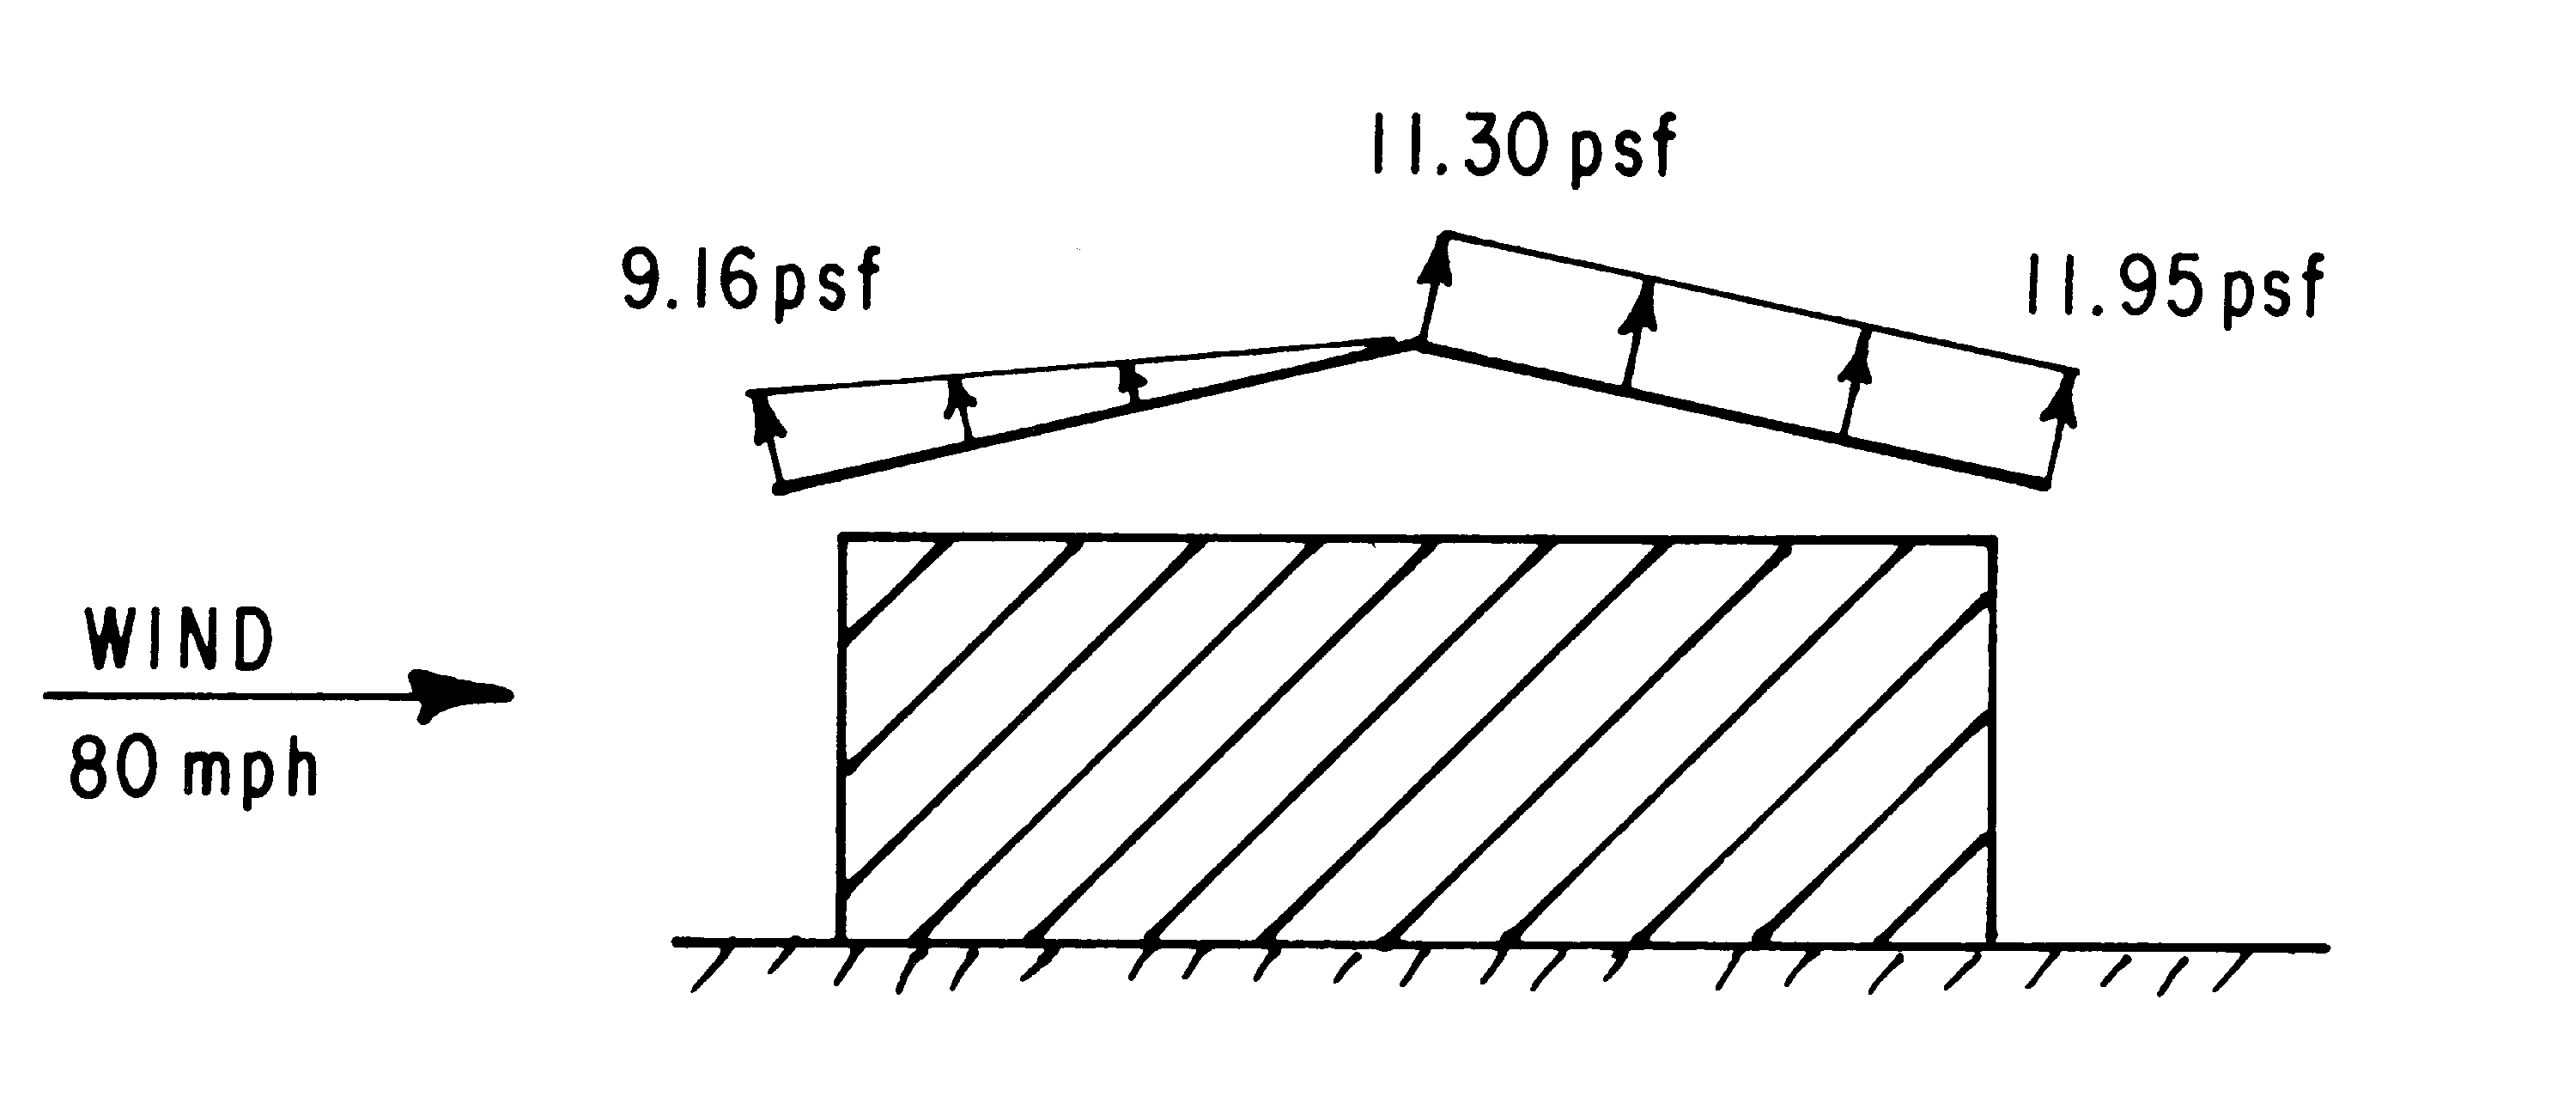 Wind force magnitude and direction on the roof of a hay shelter with hay stacked almost to the eaves.